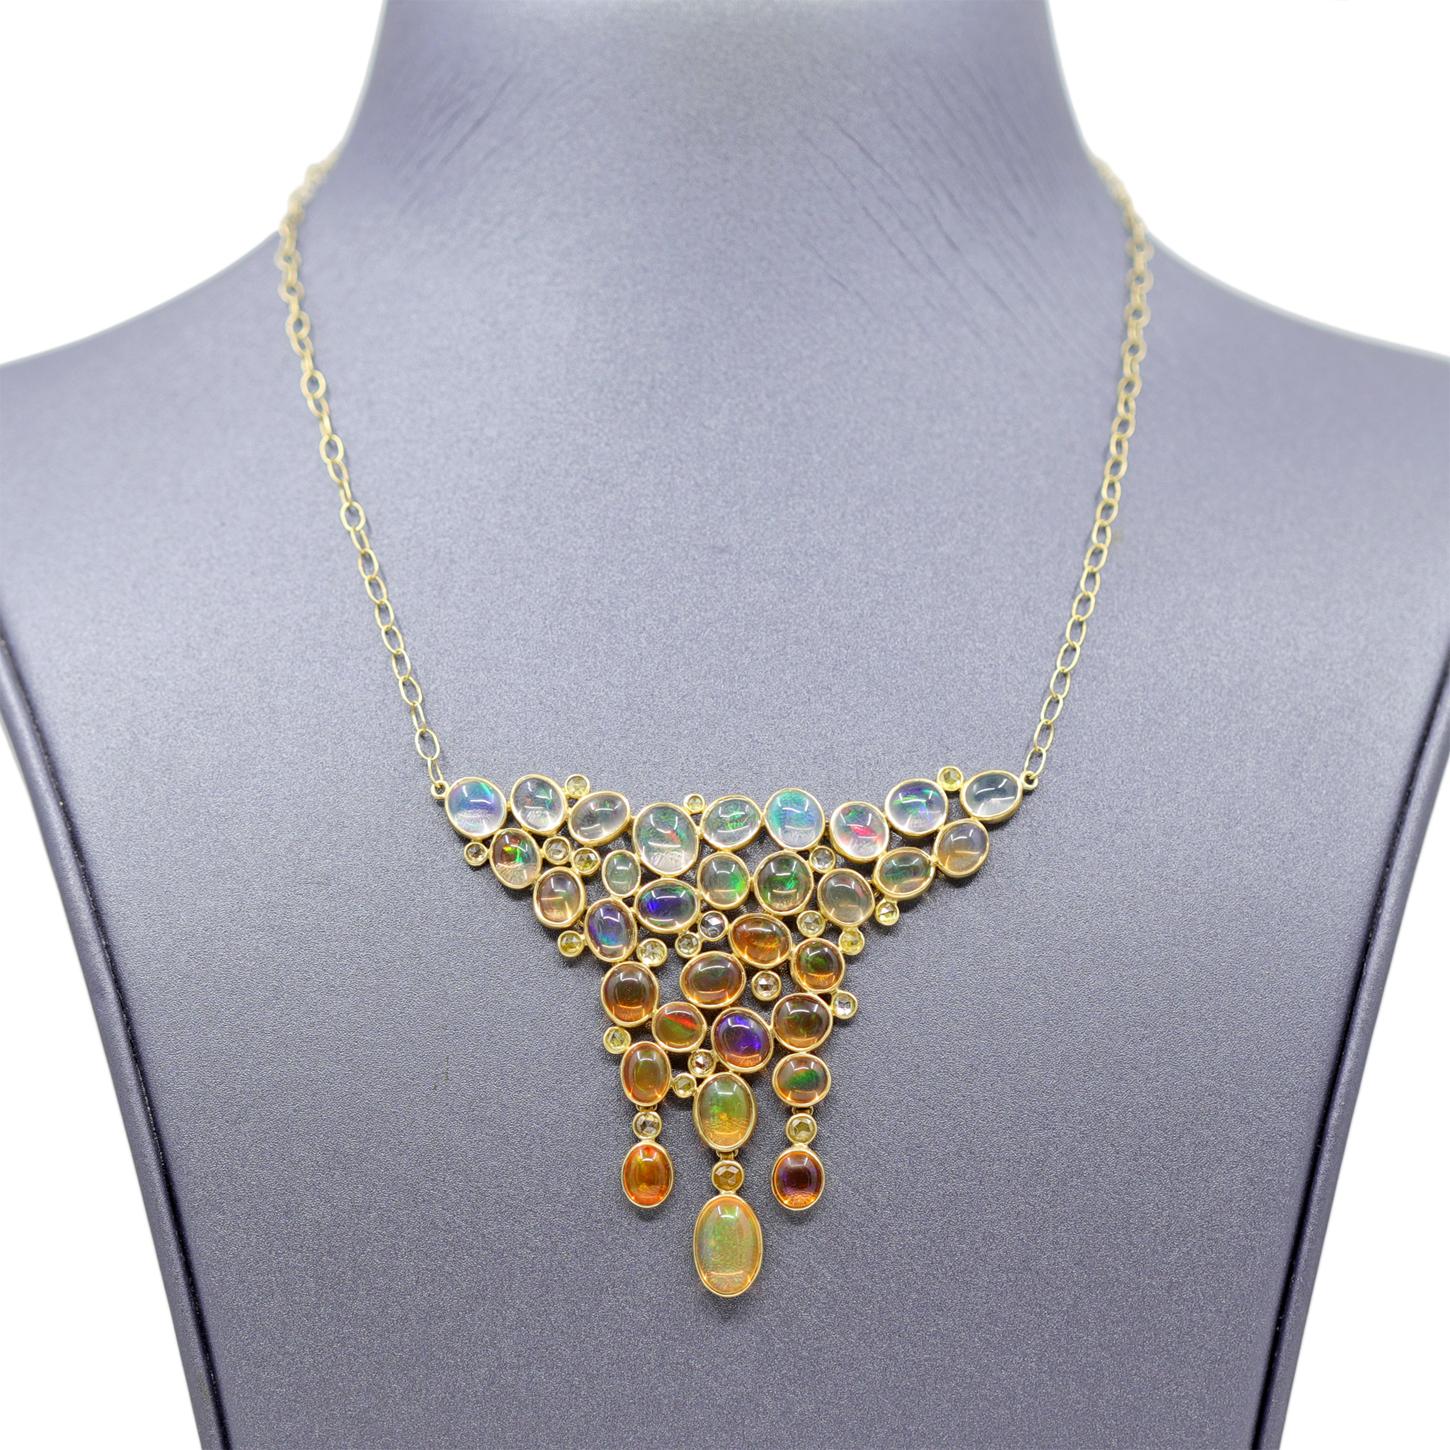 A  one-of-one wearable work of art, this intricate handmade necklace by jewelry designer Tej Kothari showcases an otherworldly assortment of translucent white Mexican jelly opal and orange Mexican fire opal oval cabochons meticulously arranged in an